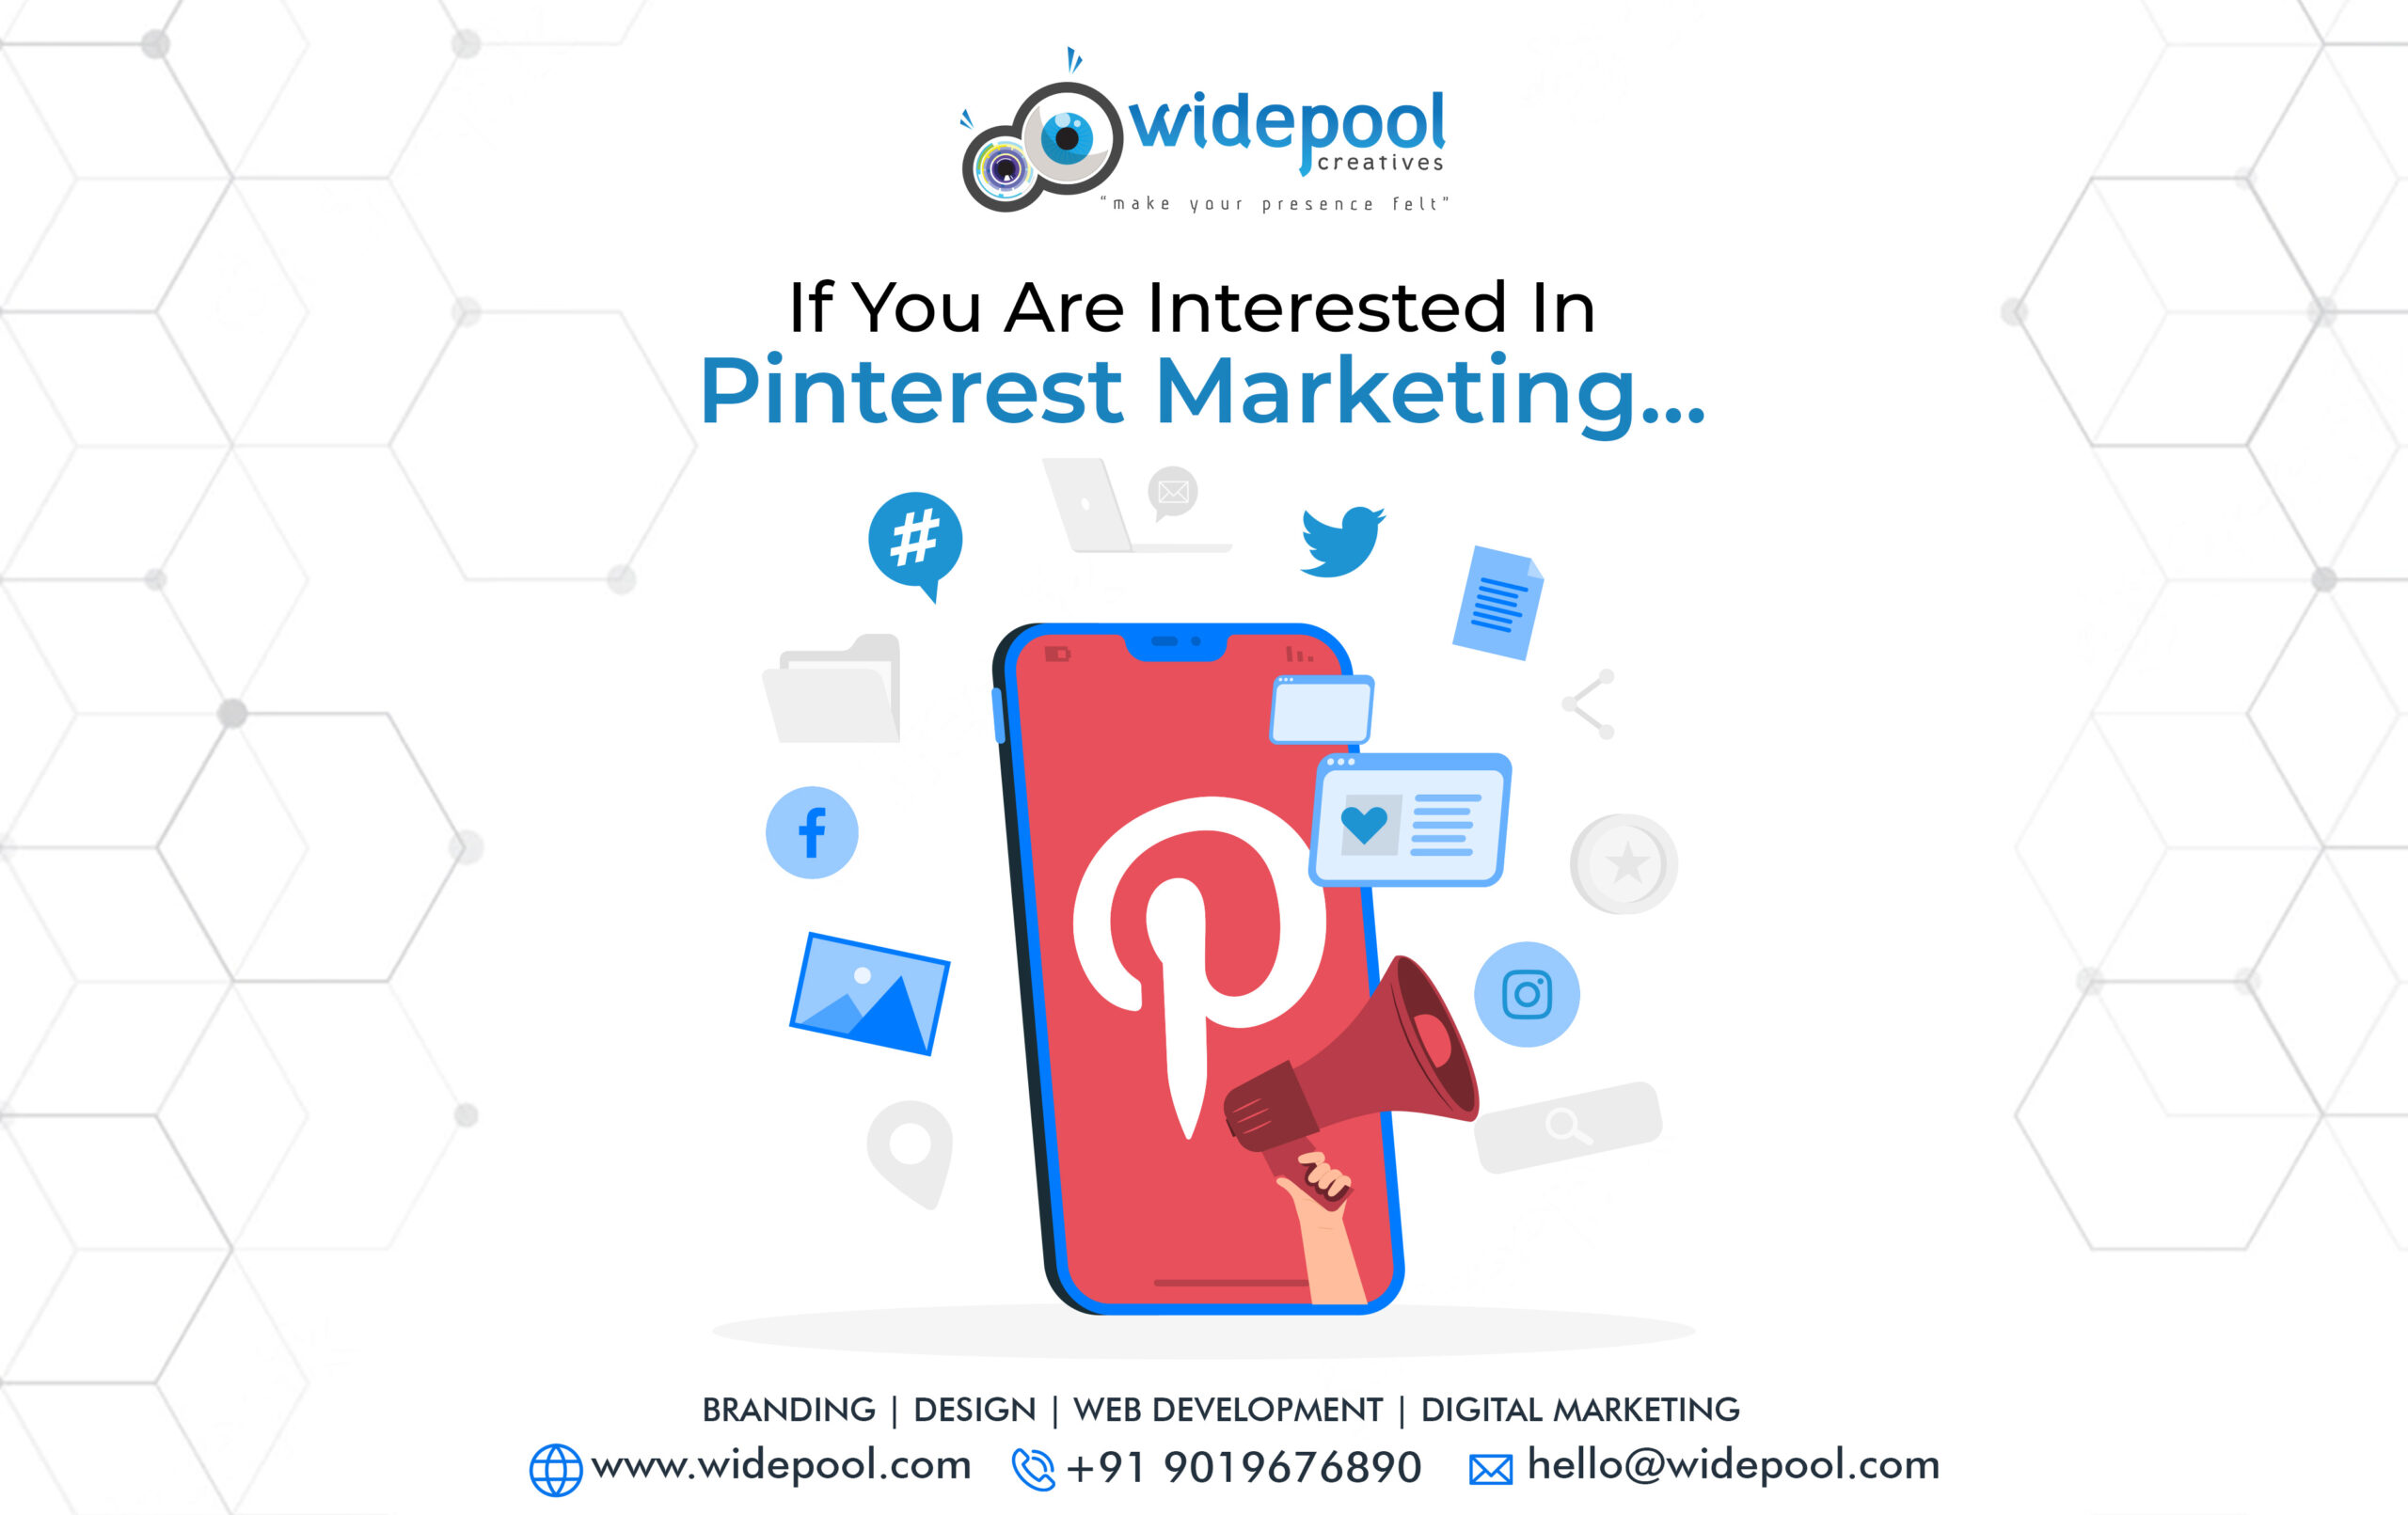 If You Are Interested in Pinterest Marketing